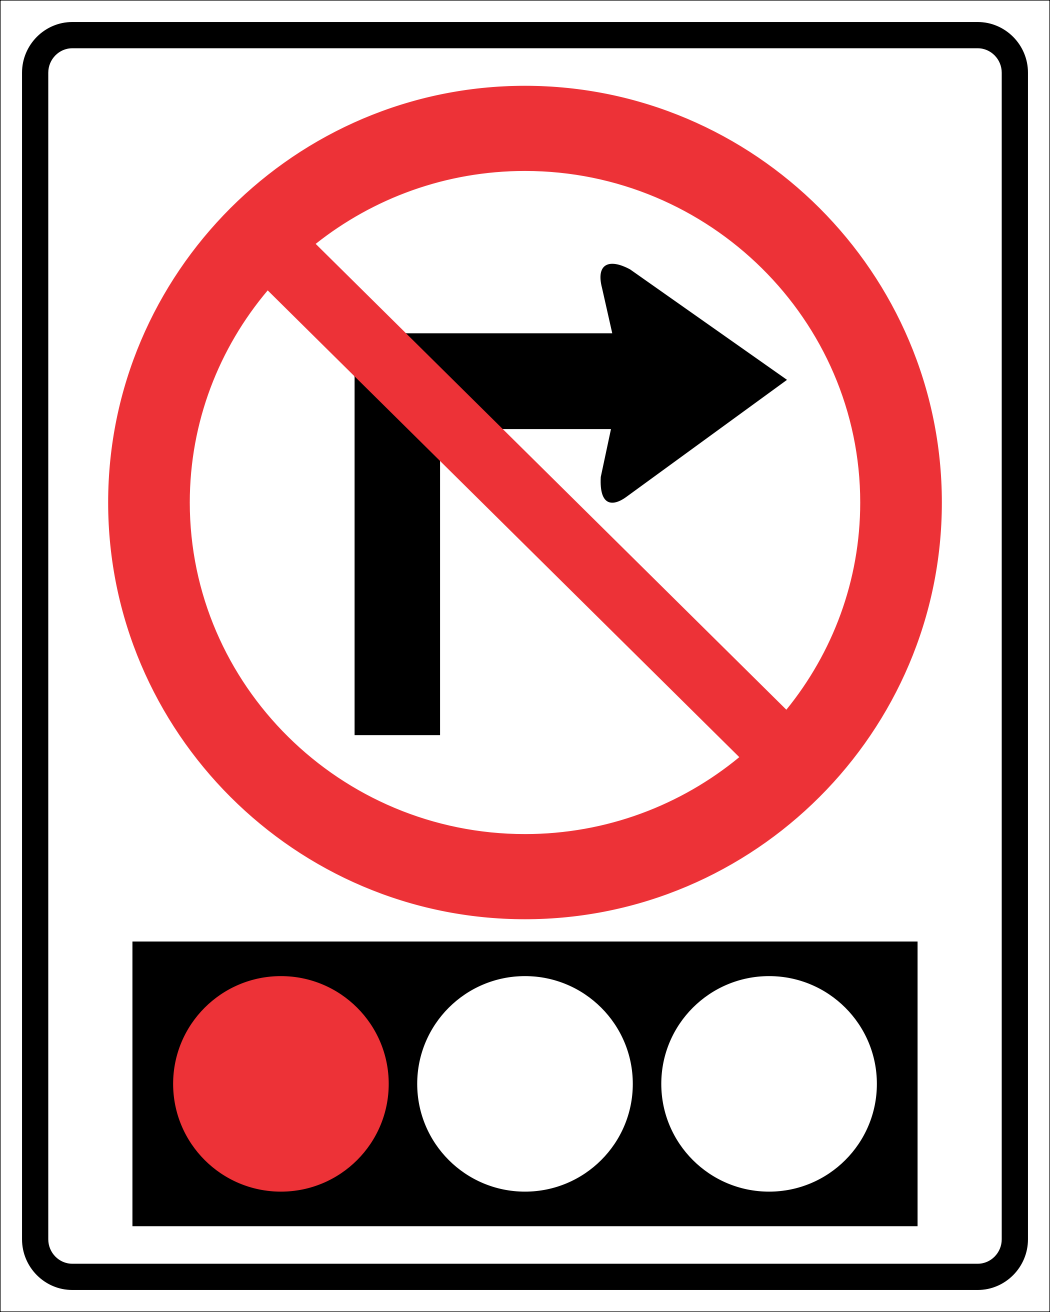 Right Turn On Red Signal Prohibited Horizontal Sign MUTCDC RB-17HR